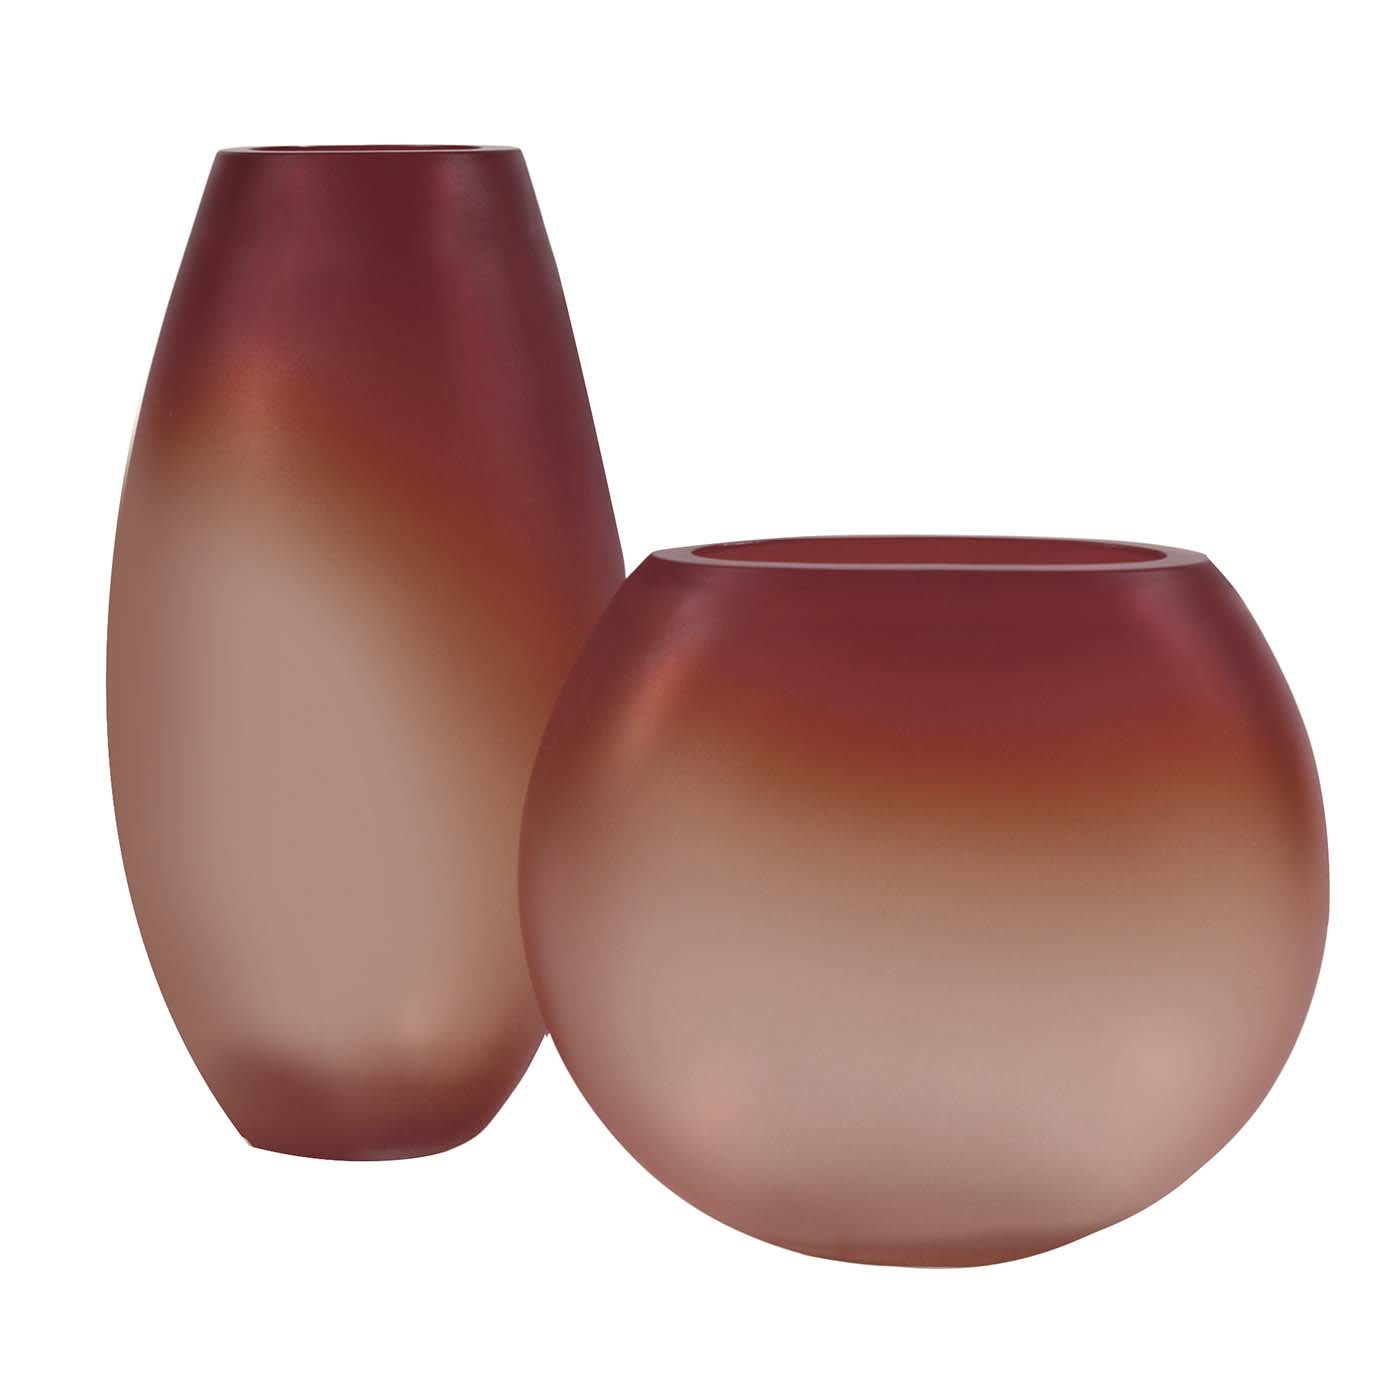 Segretissimi Set of Two Red Vases - Fornace Mian